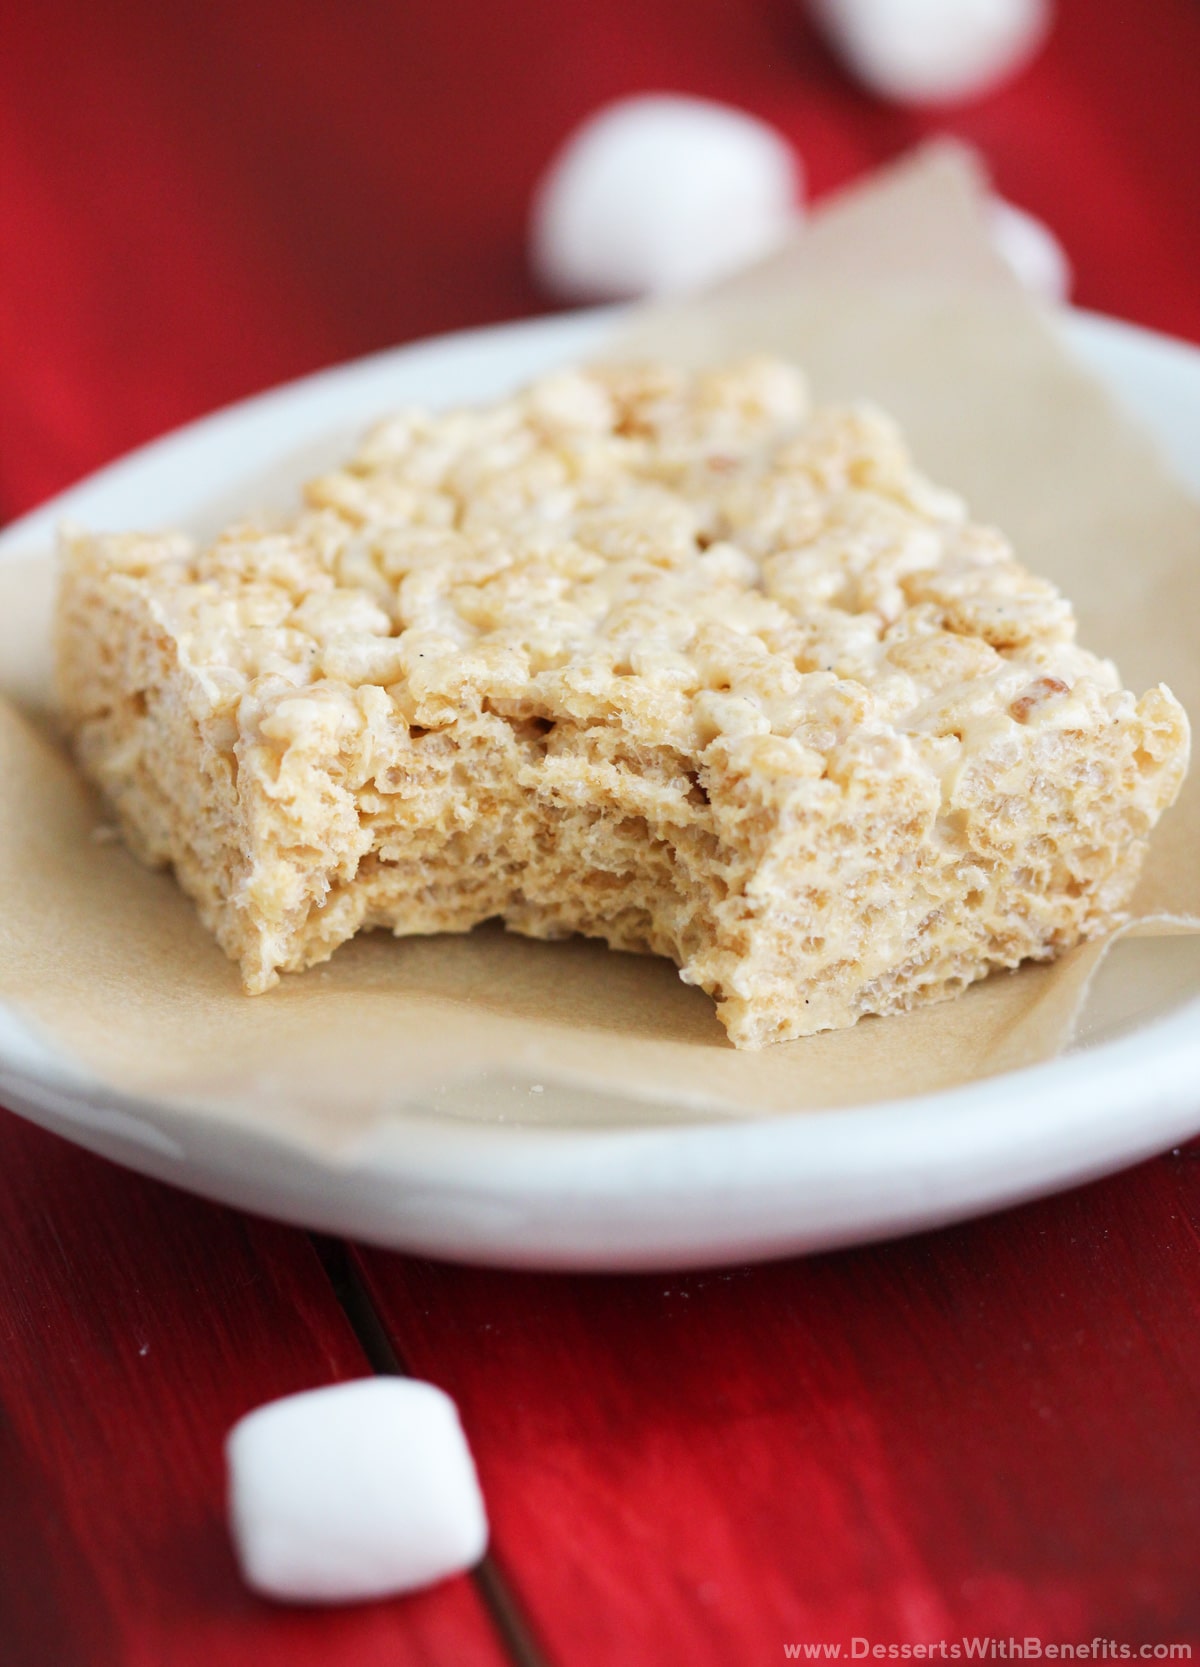 Simple, quick, and easy Healthy Protein Krispy Treats recipe – only 4 ingredients needed to make these chewy and crunchy (all natural, low fat, refined sugar free, and gluten free) treats! Healthy Dessert Recipes at Desserts with Benefits